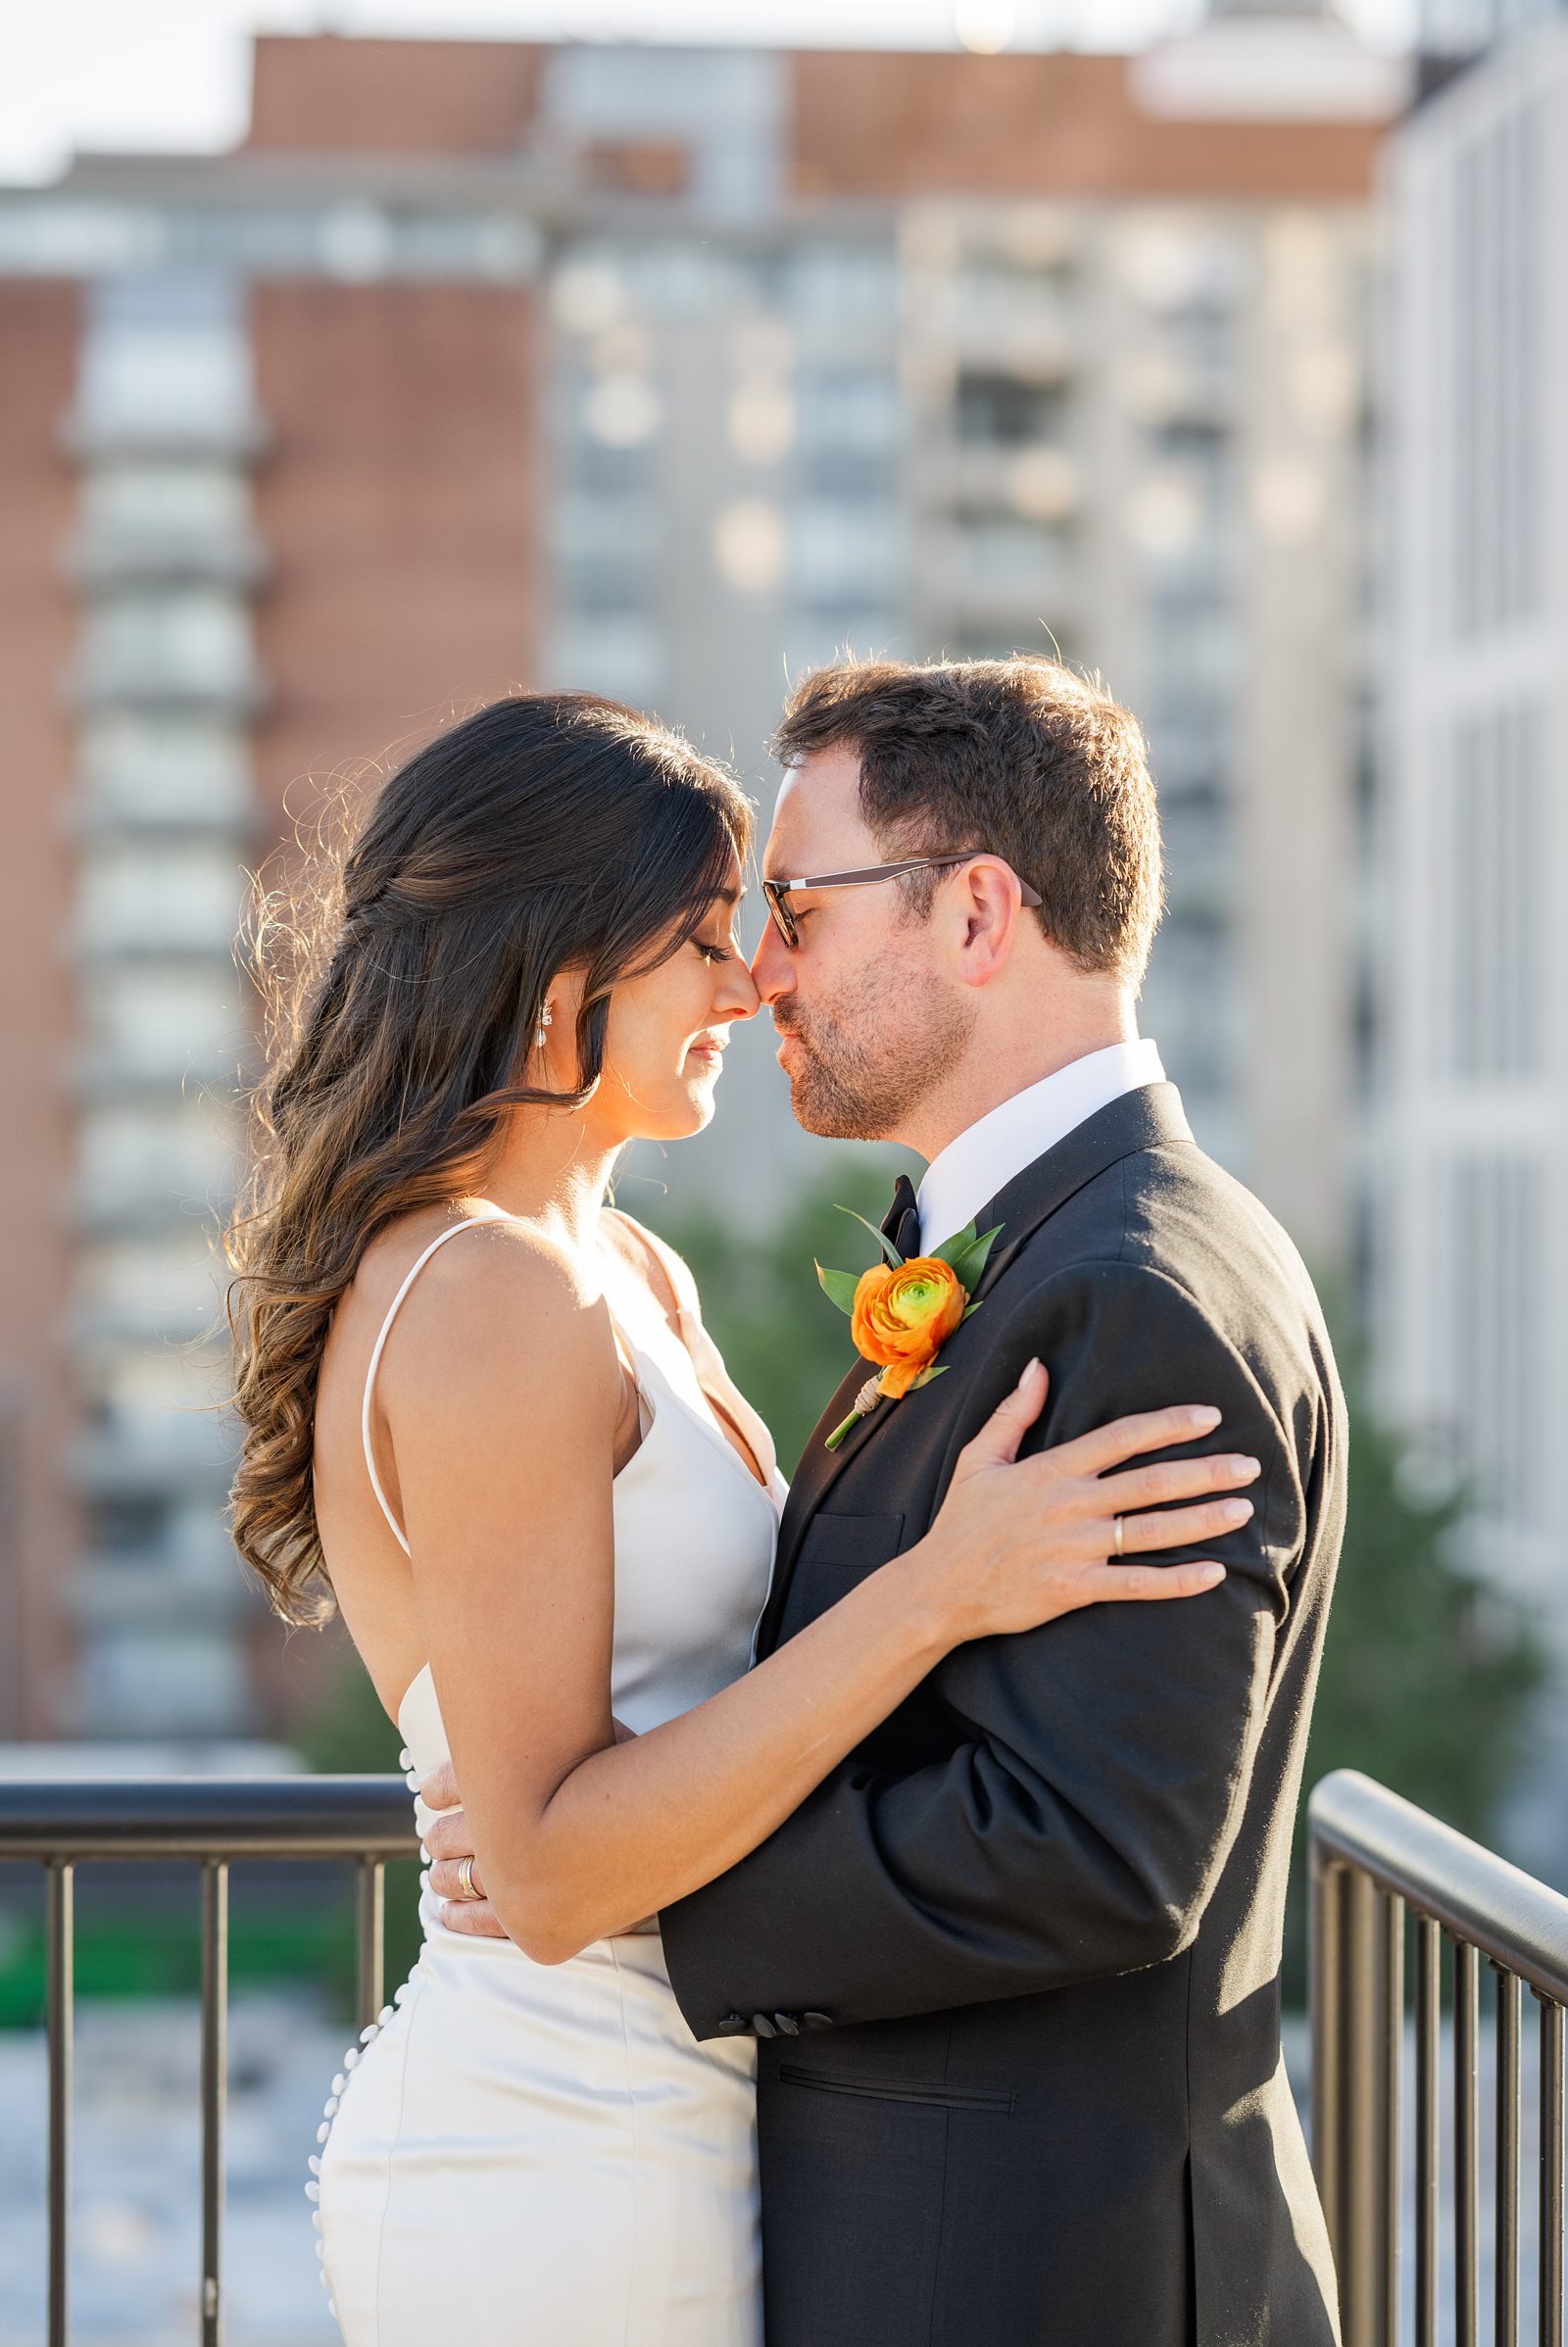 Bride and Groom Sunset Portraits in City at Fall Common House Richmond Wedding 